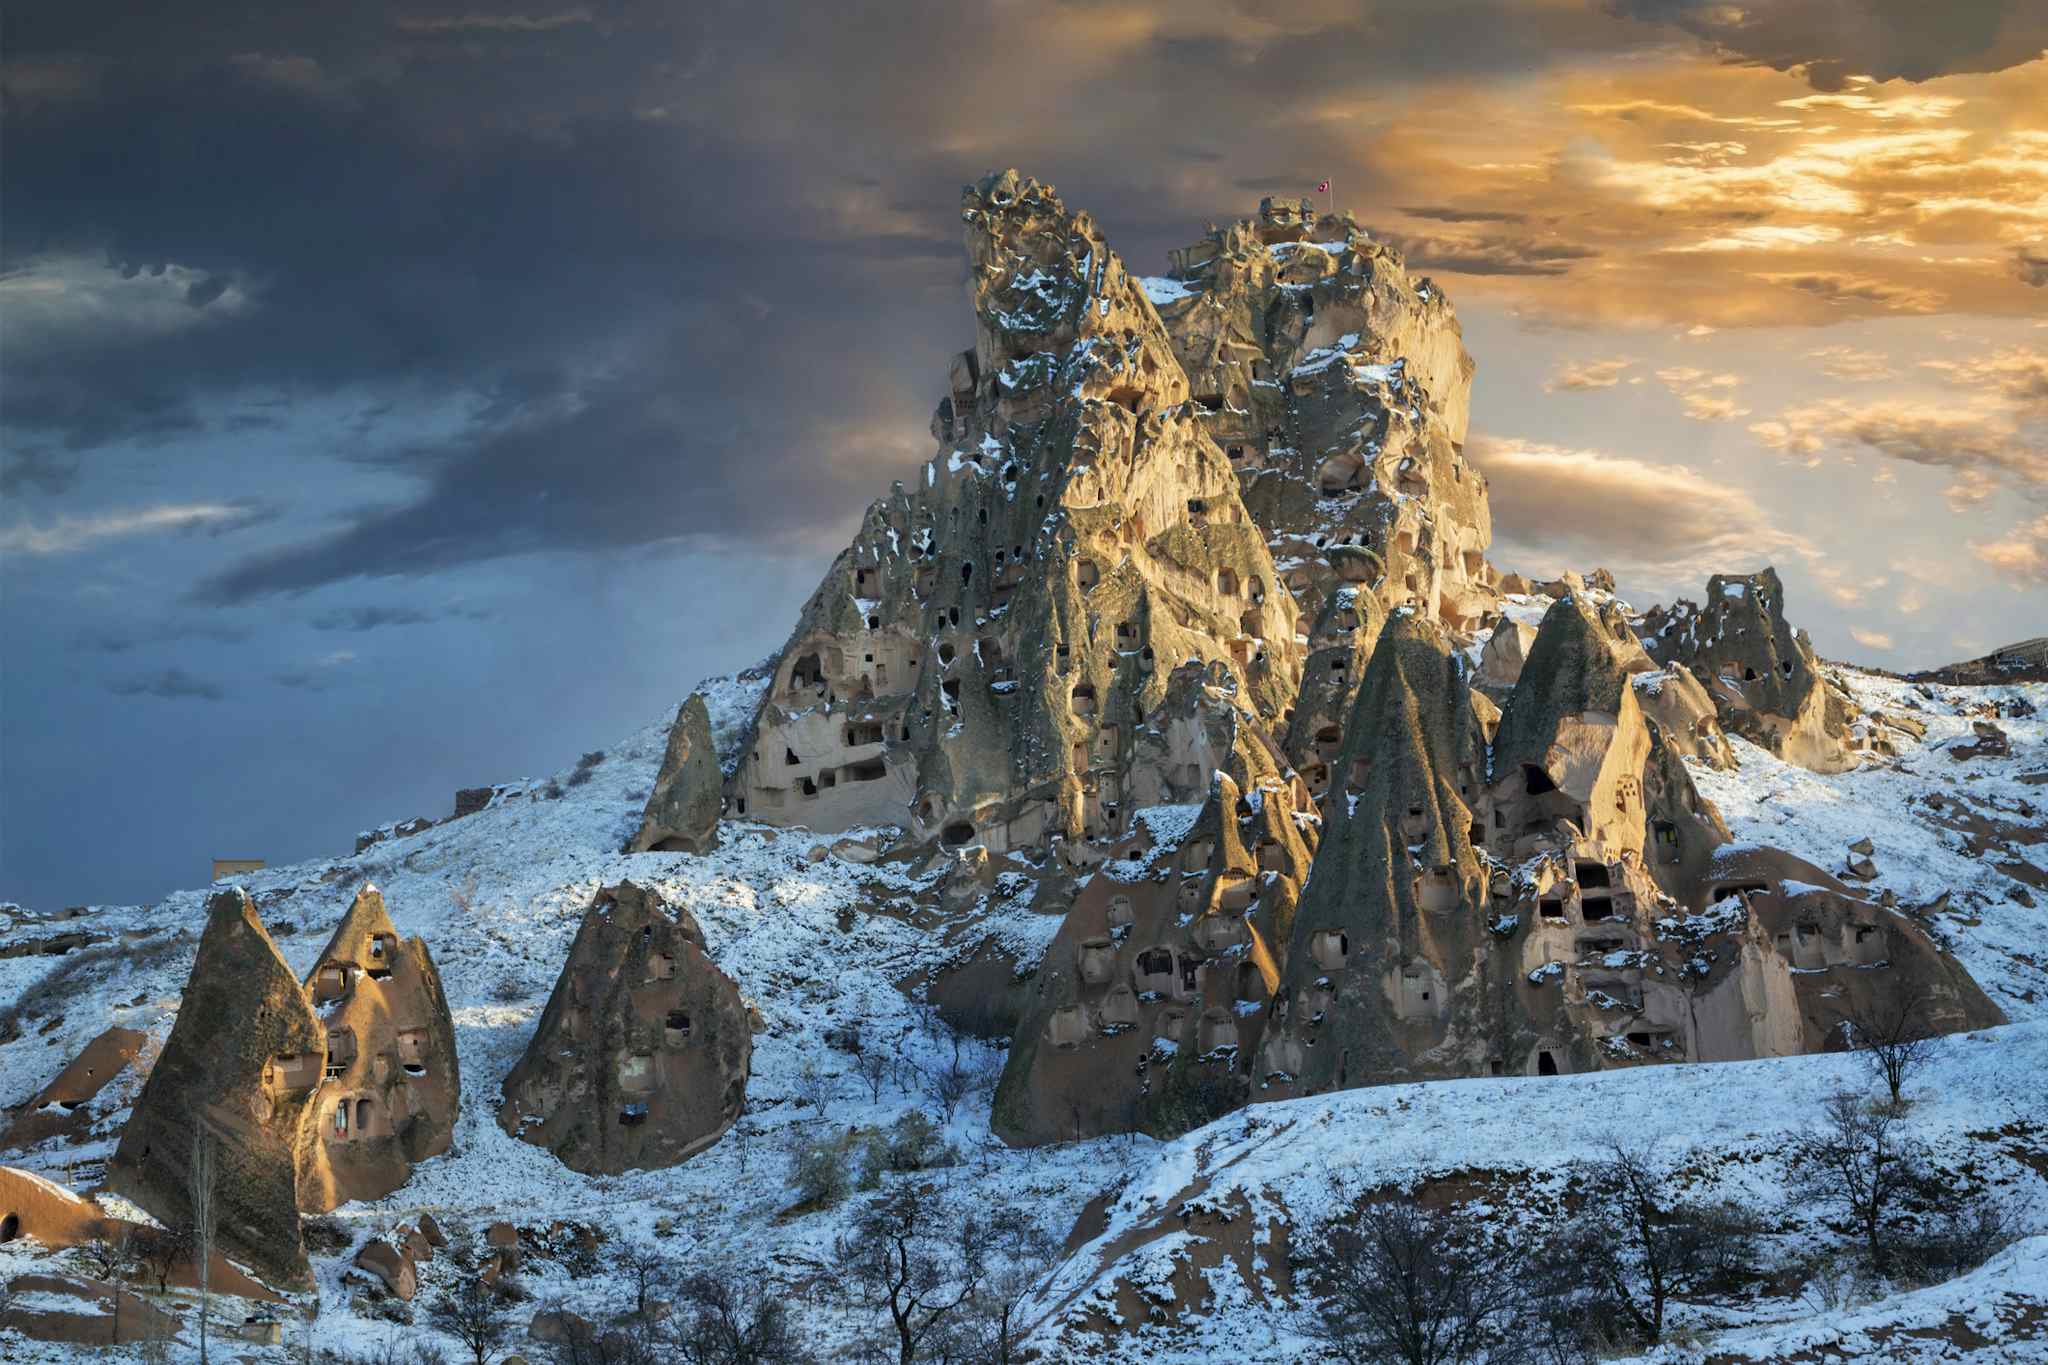 Volcanic rock formations in the town of Uchisar in the snow at the sunset in Cappadocia, Turkey. Photo: GettyImages-1313634518